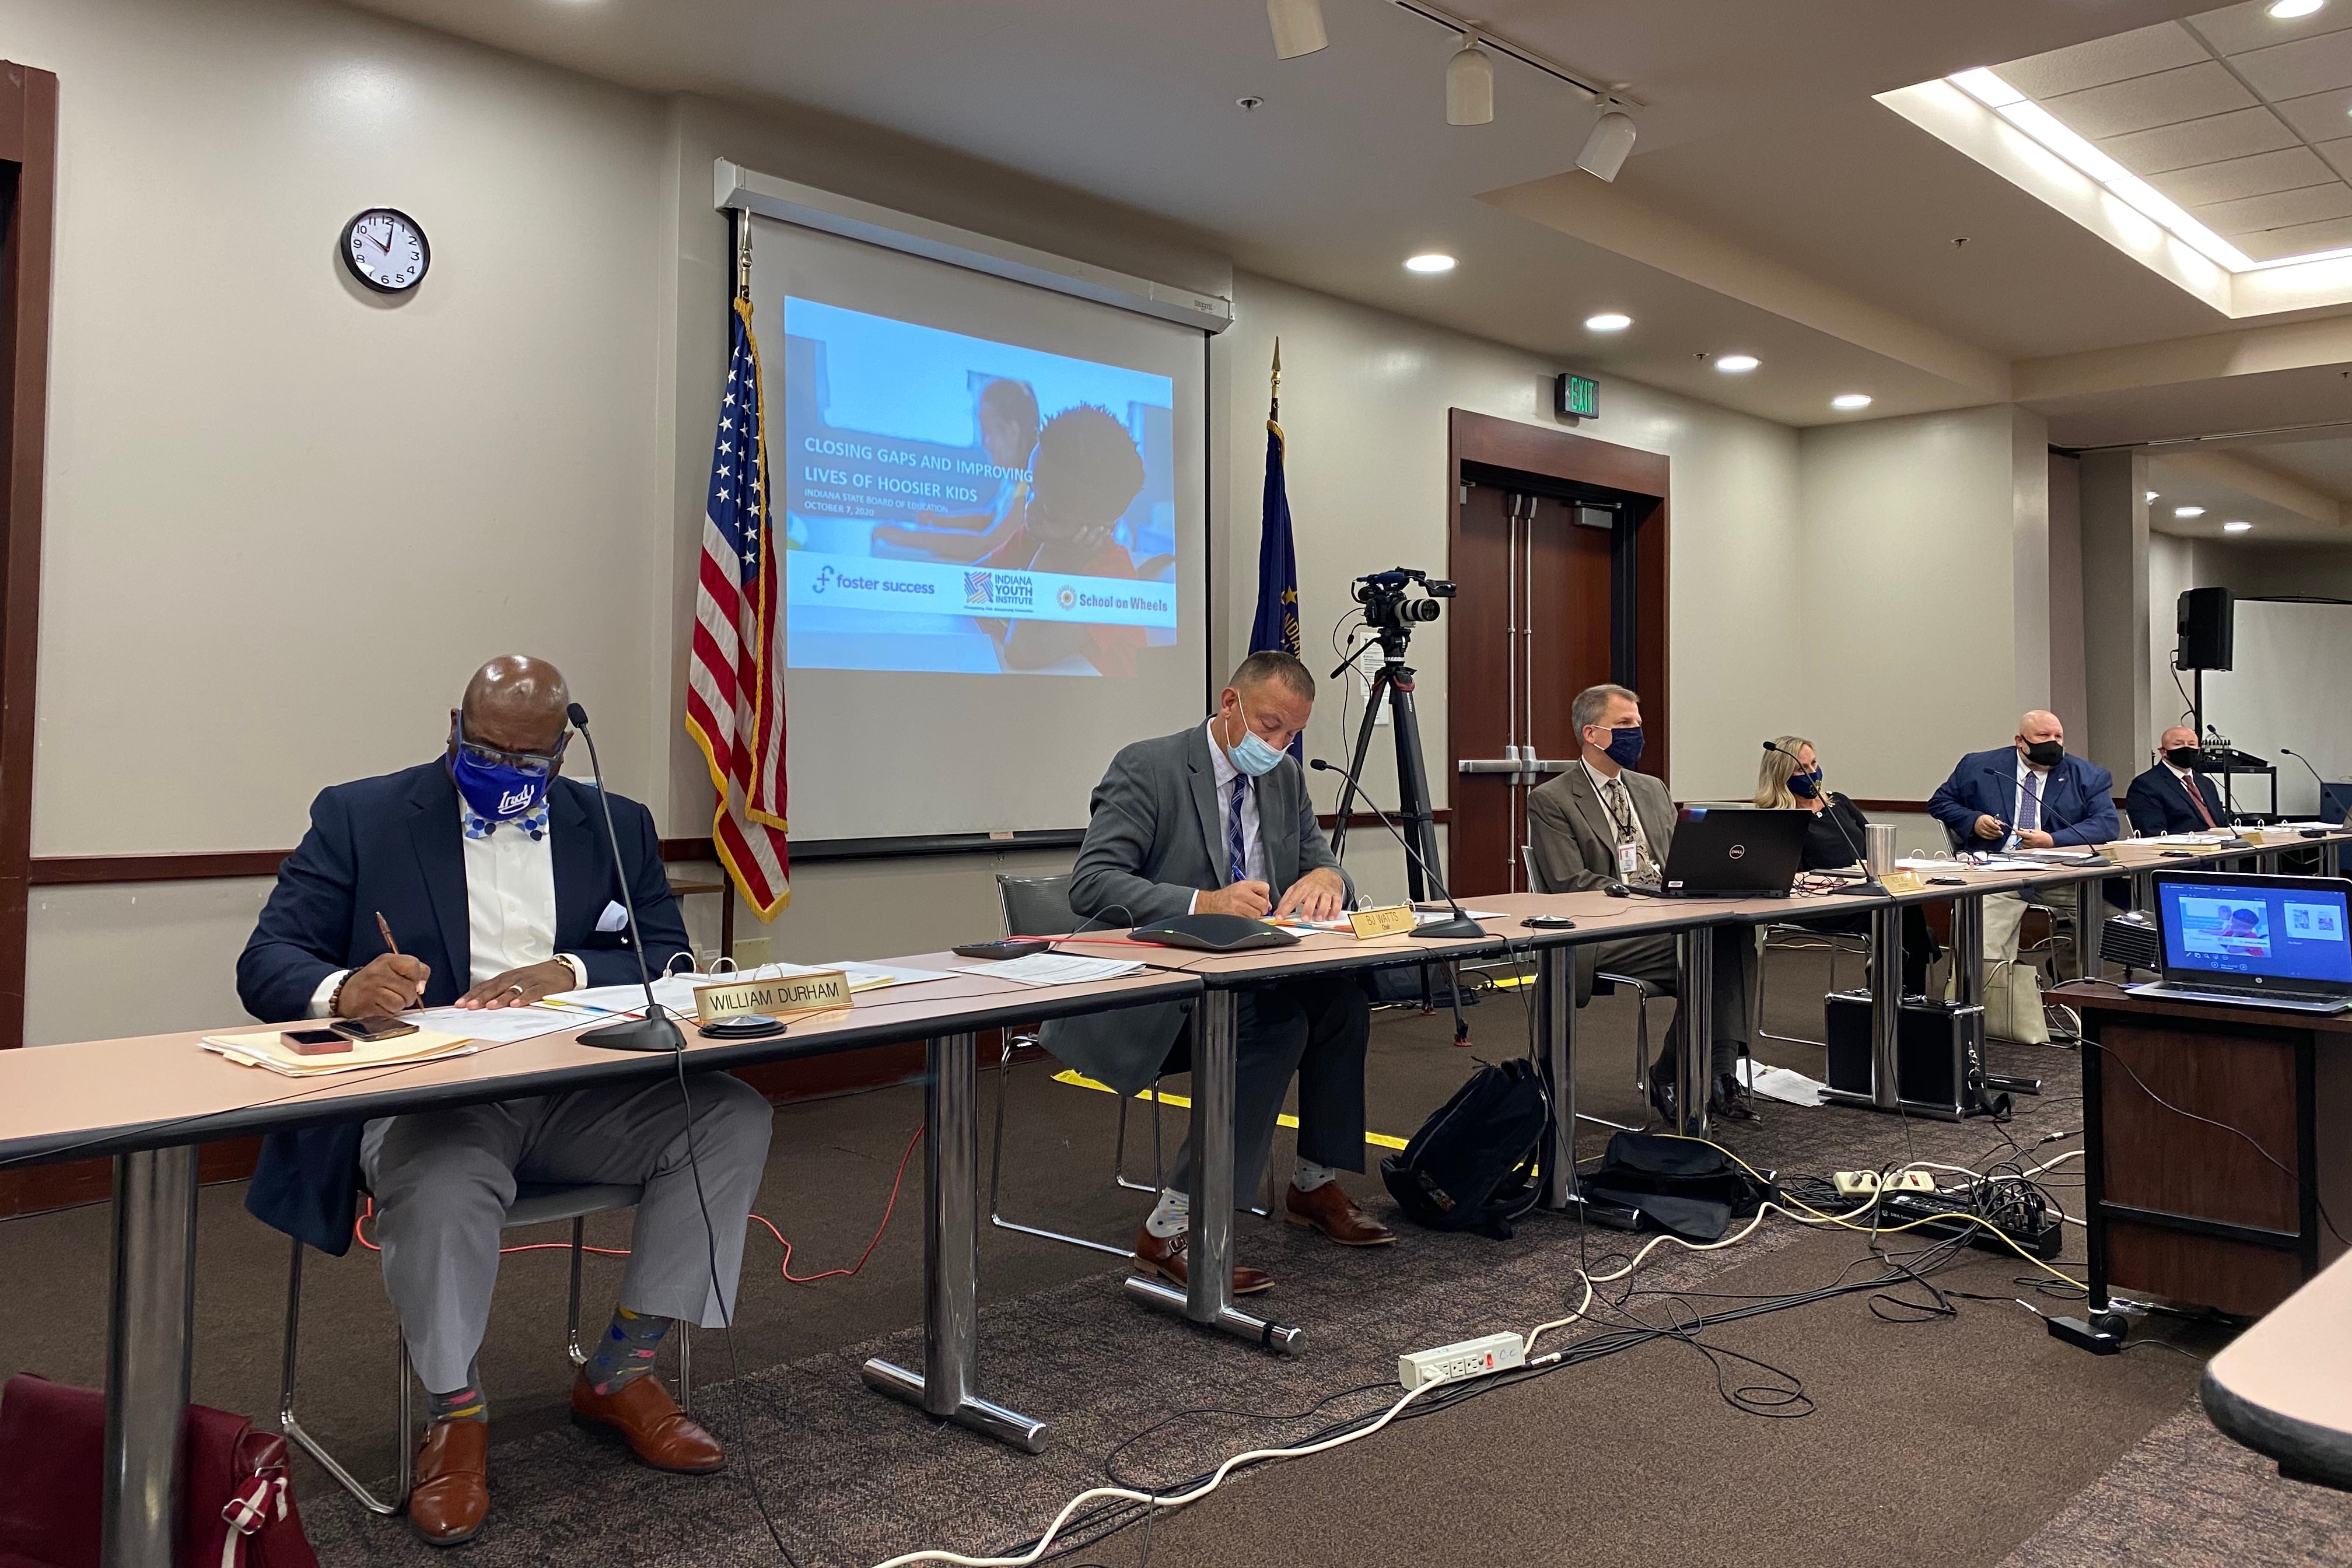 Indiana State Board of Education members meet to discuss A-F grades for schools and other education issues at the monthly board meeting on Oct. 7, 2020.